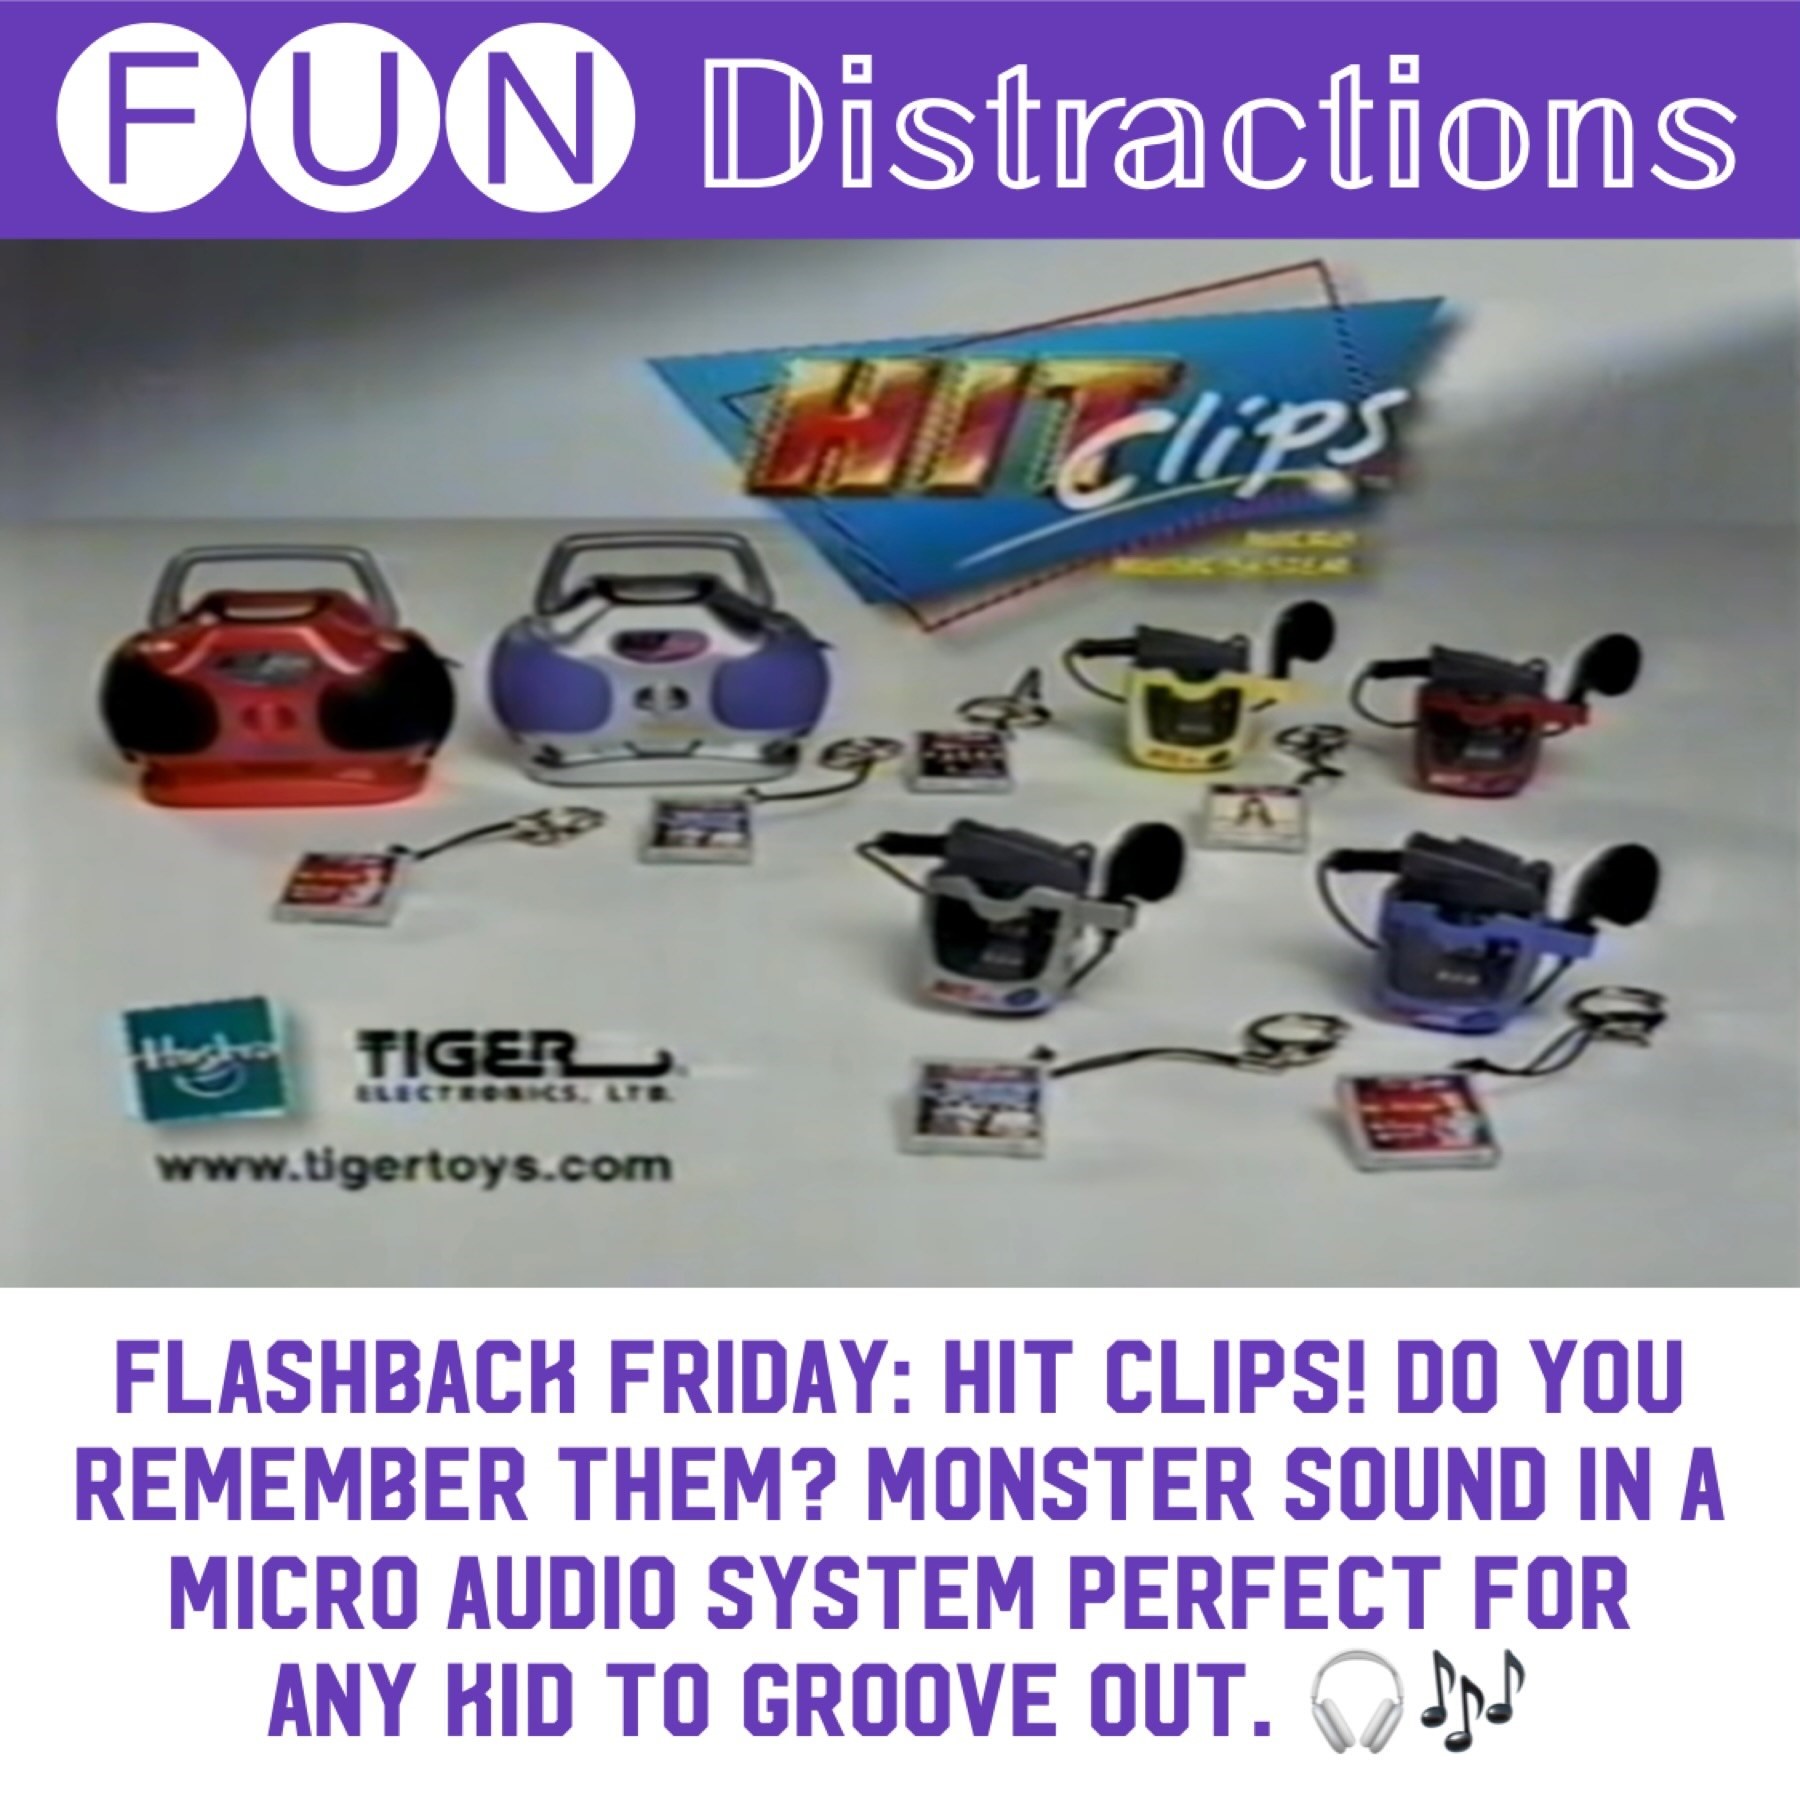 Image advertising the Library’s FUN Distractions series post about Hit Clips